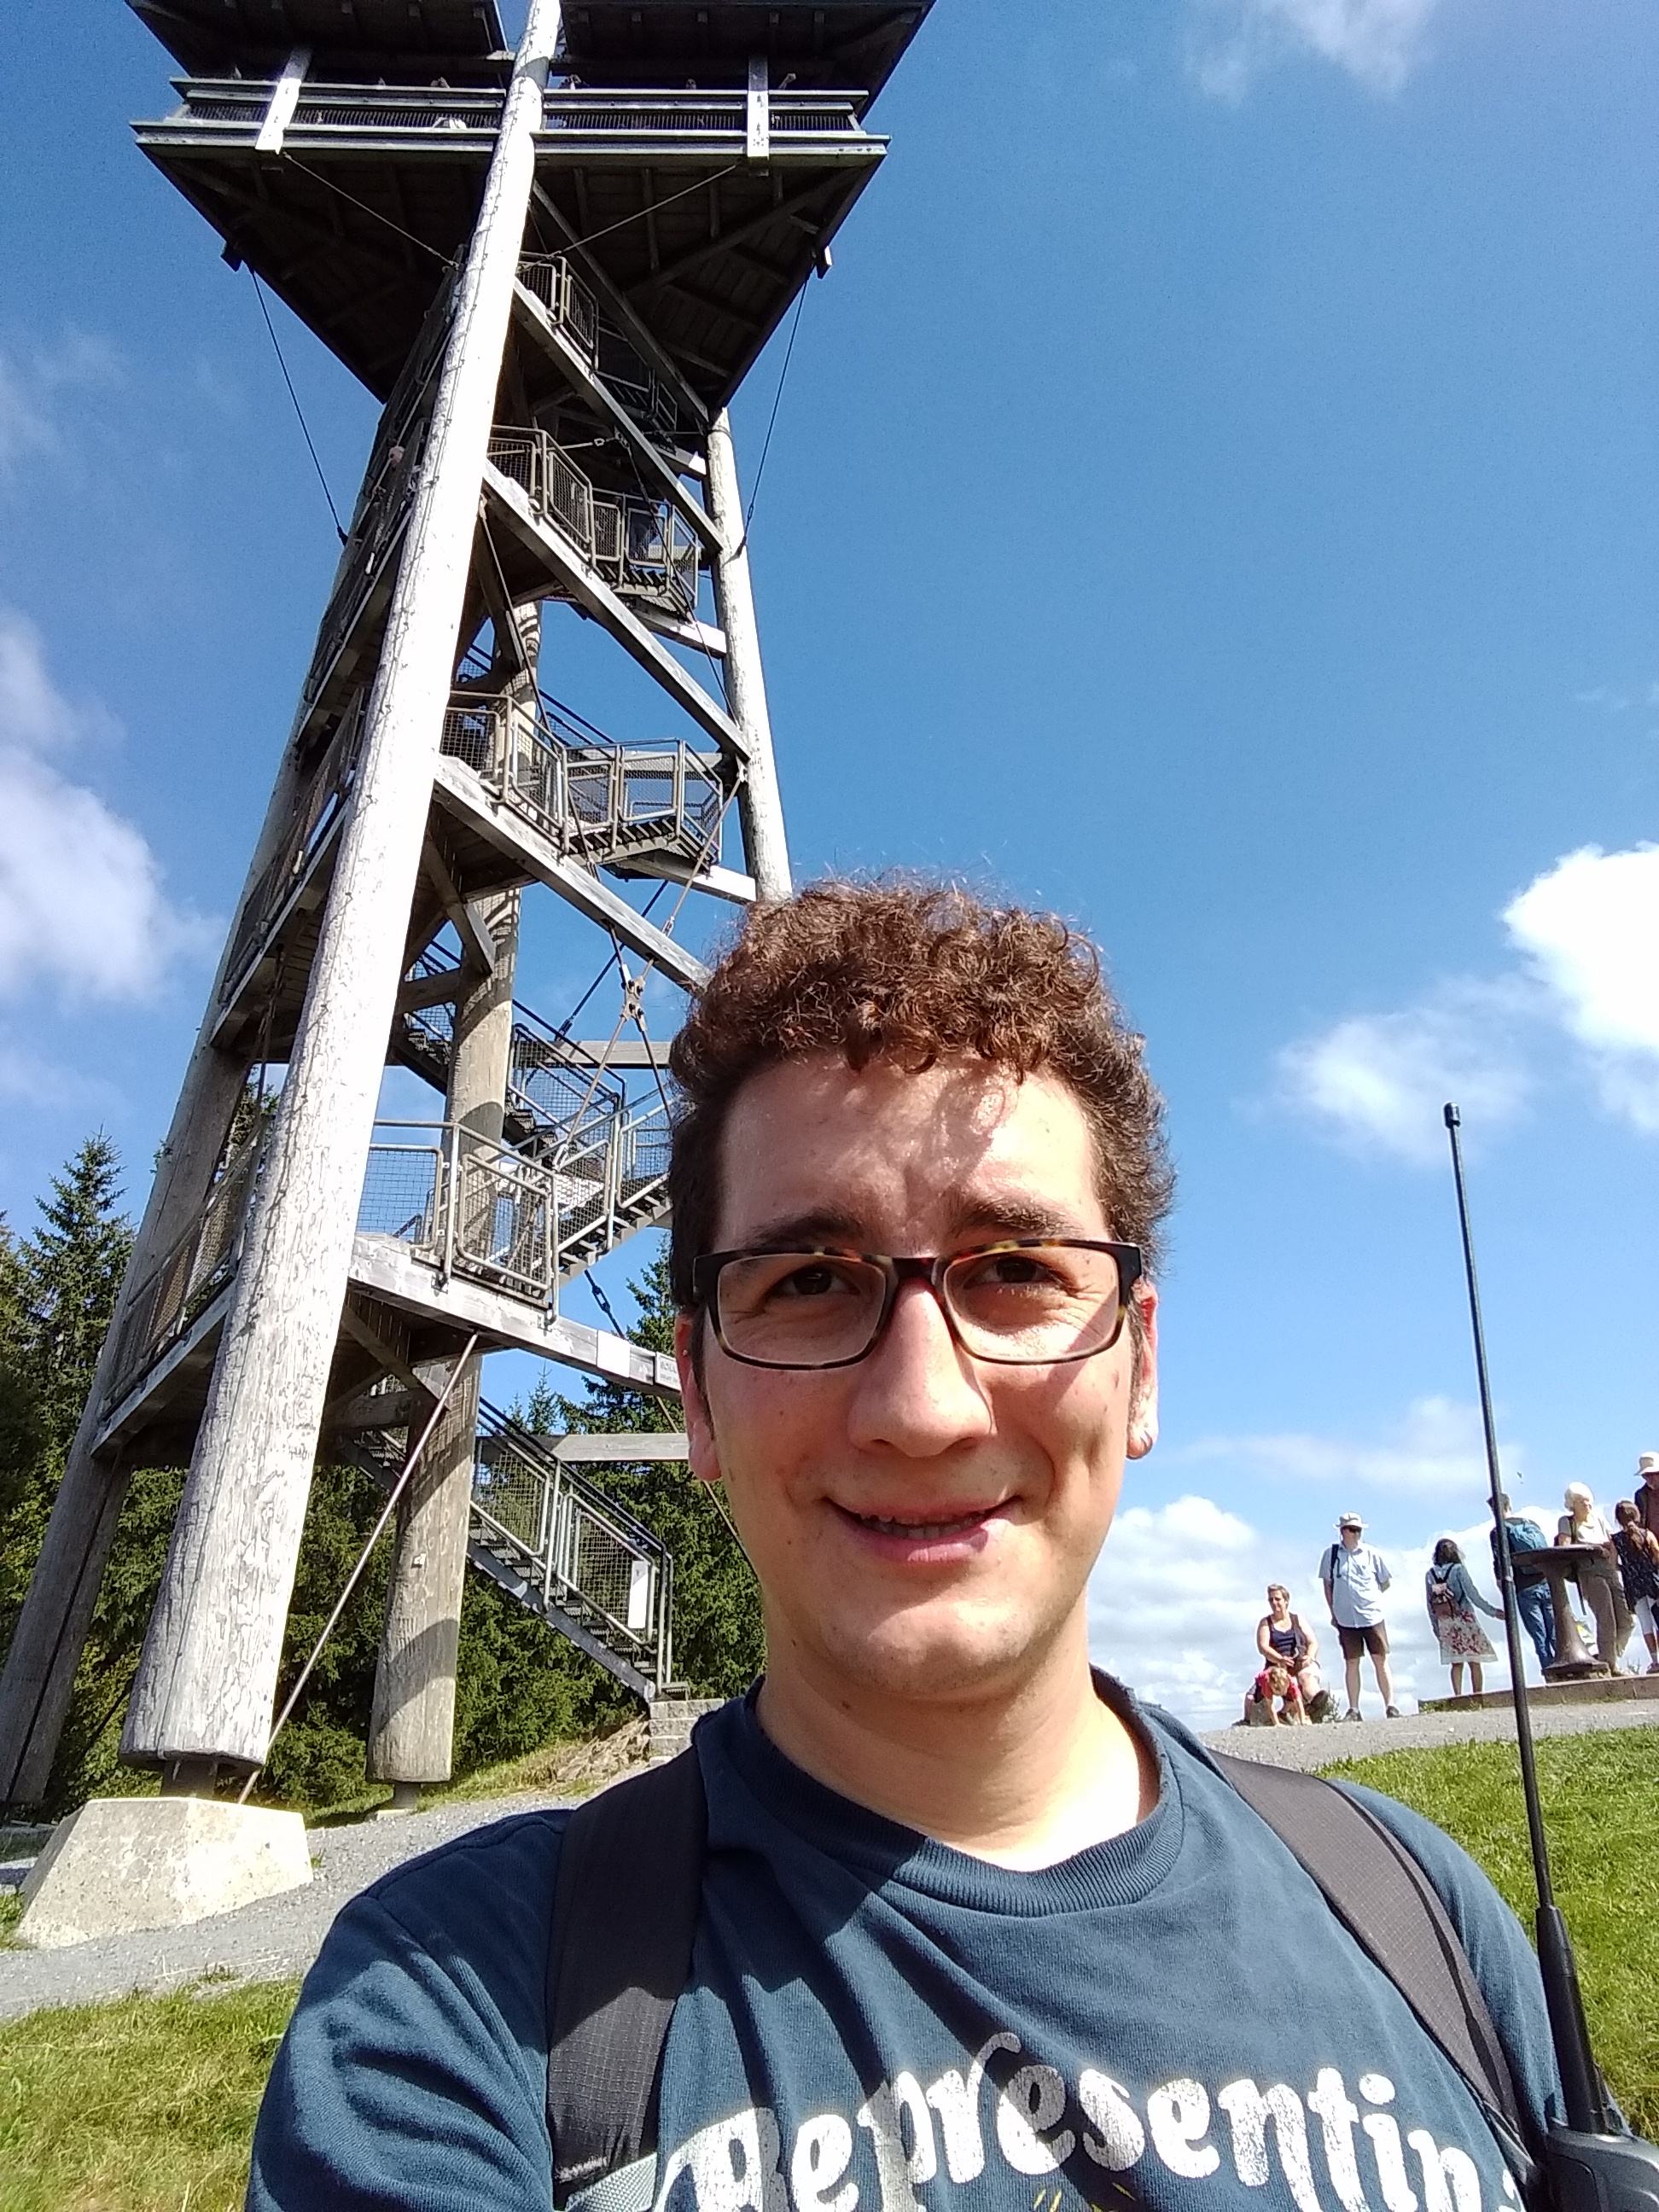 Selfie on Schauinsland with the observation tower visible in the background.